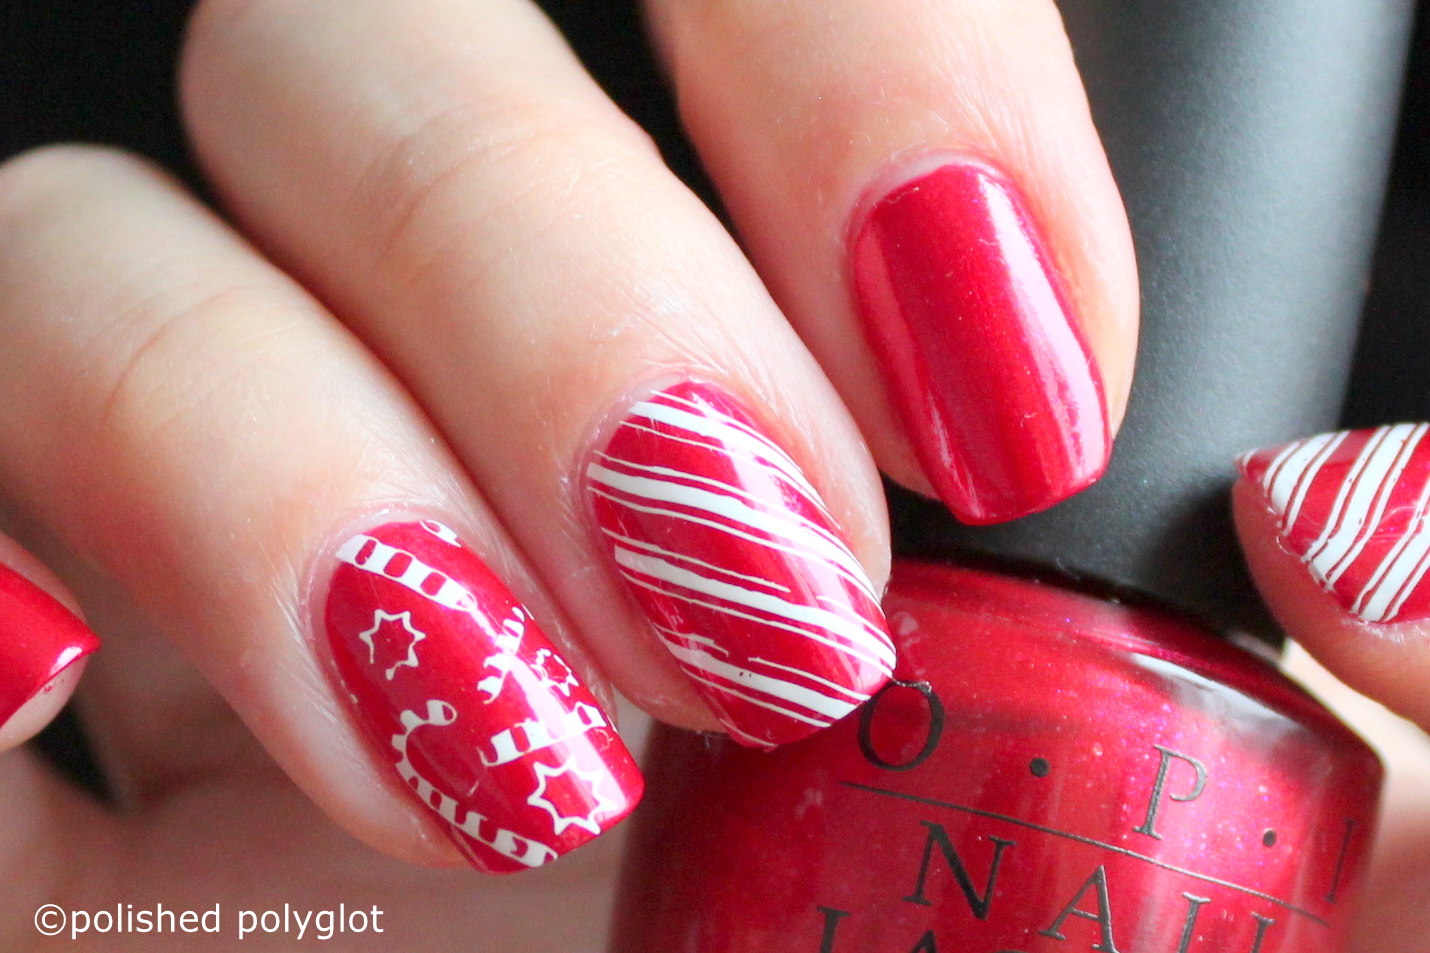 2. Festive Candy Cane Nail Designs for the Holidays - wide 7